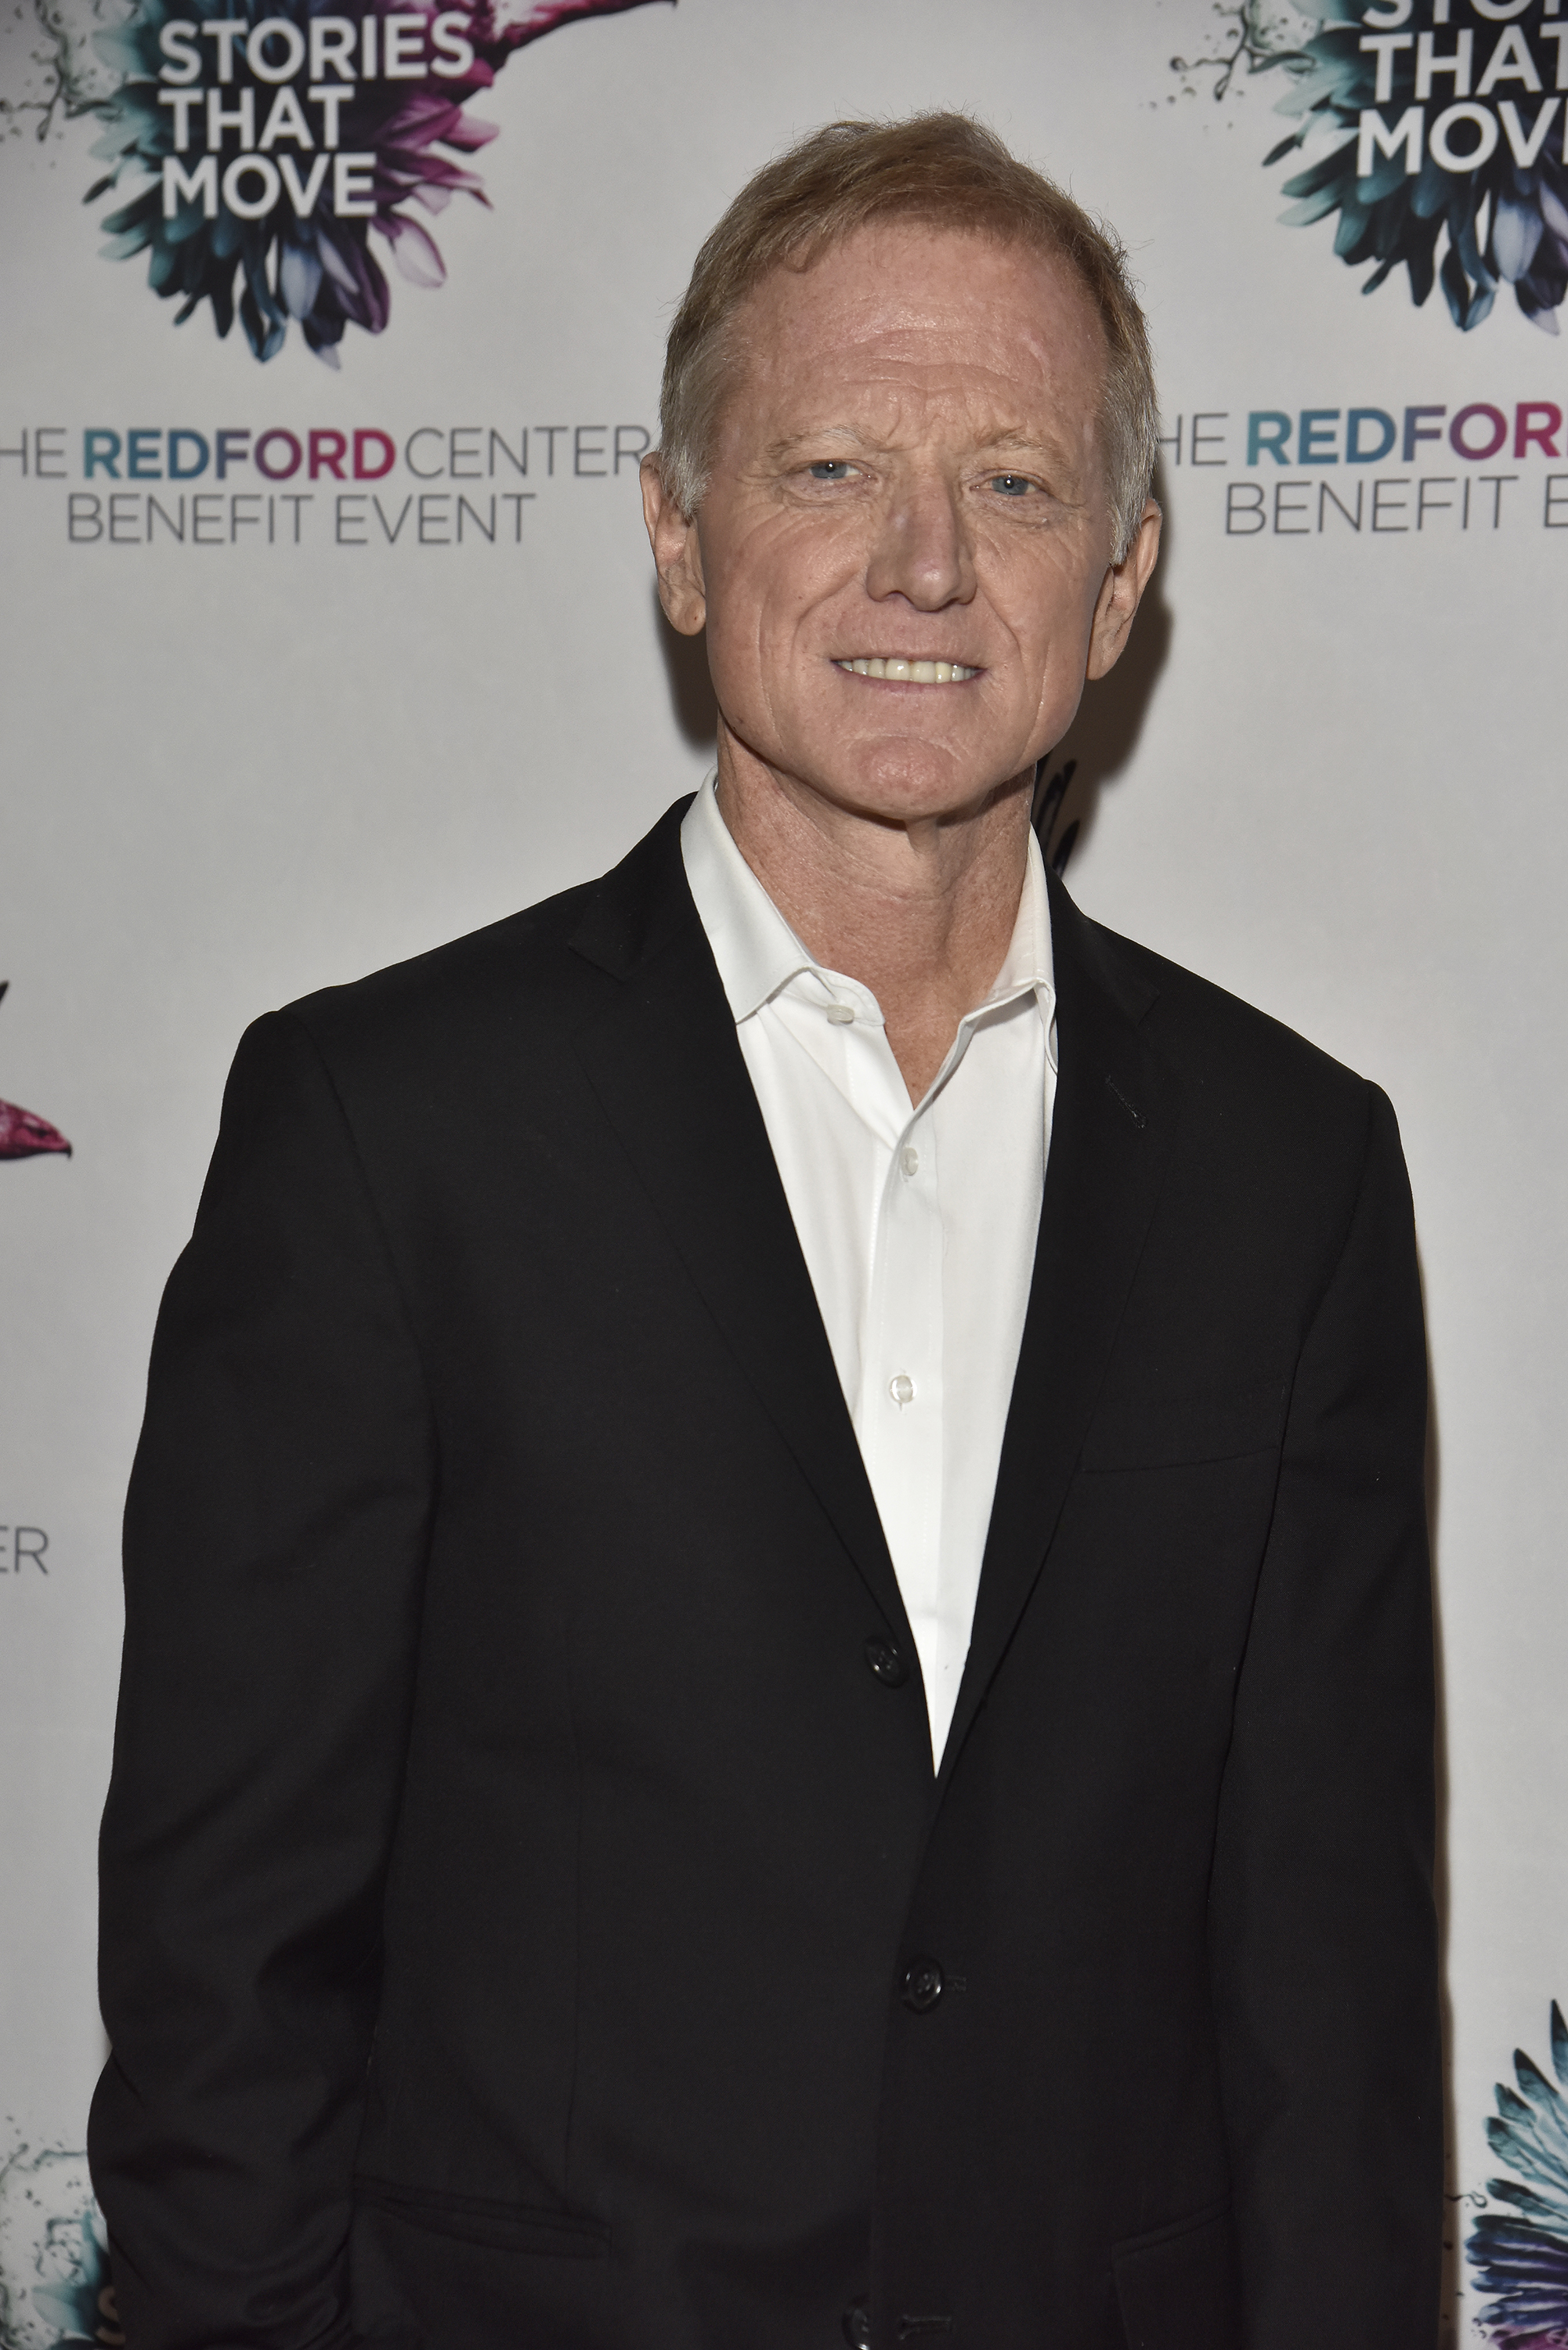 James Redford attends The Redford Center's Benefit at August Hall in San Francisco, California, on December 6, 2018. | Source: Getty Images